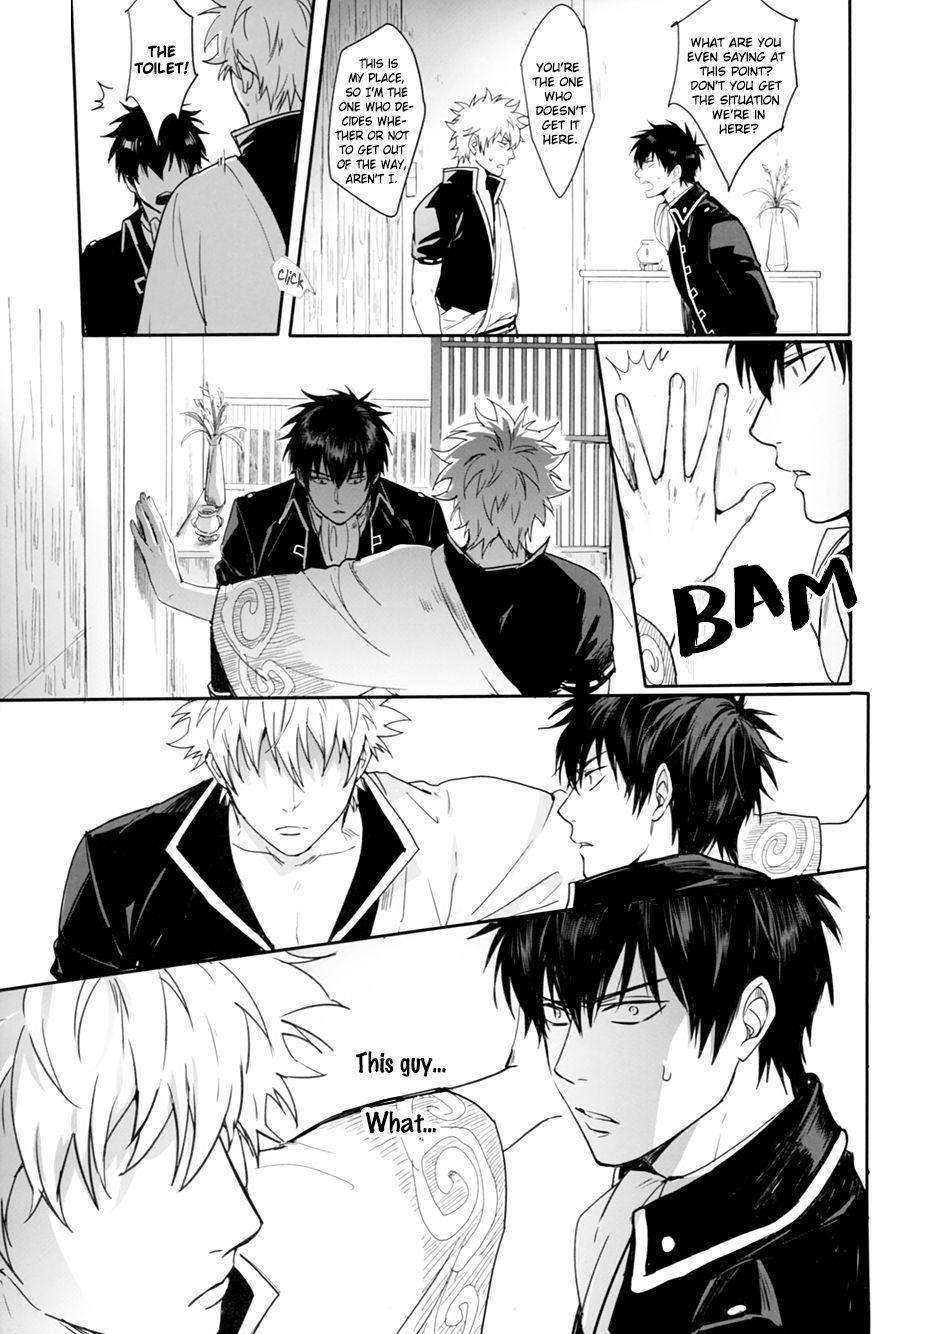 Deep Throat UNTIME BOMB - Gintama Style - Page 4